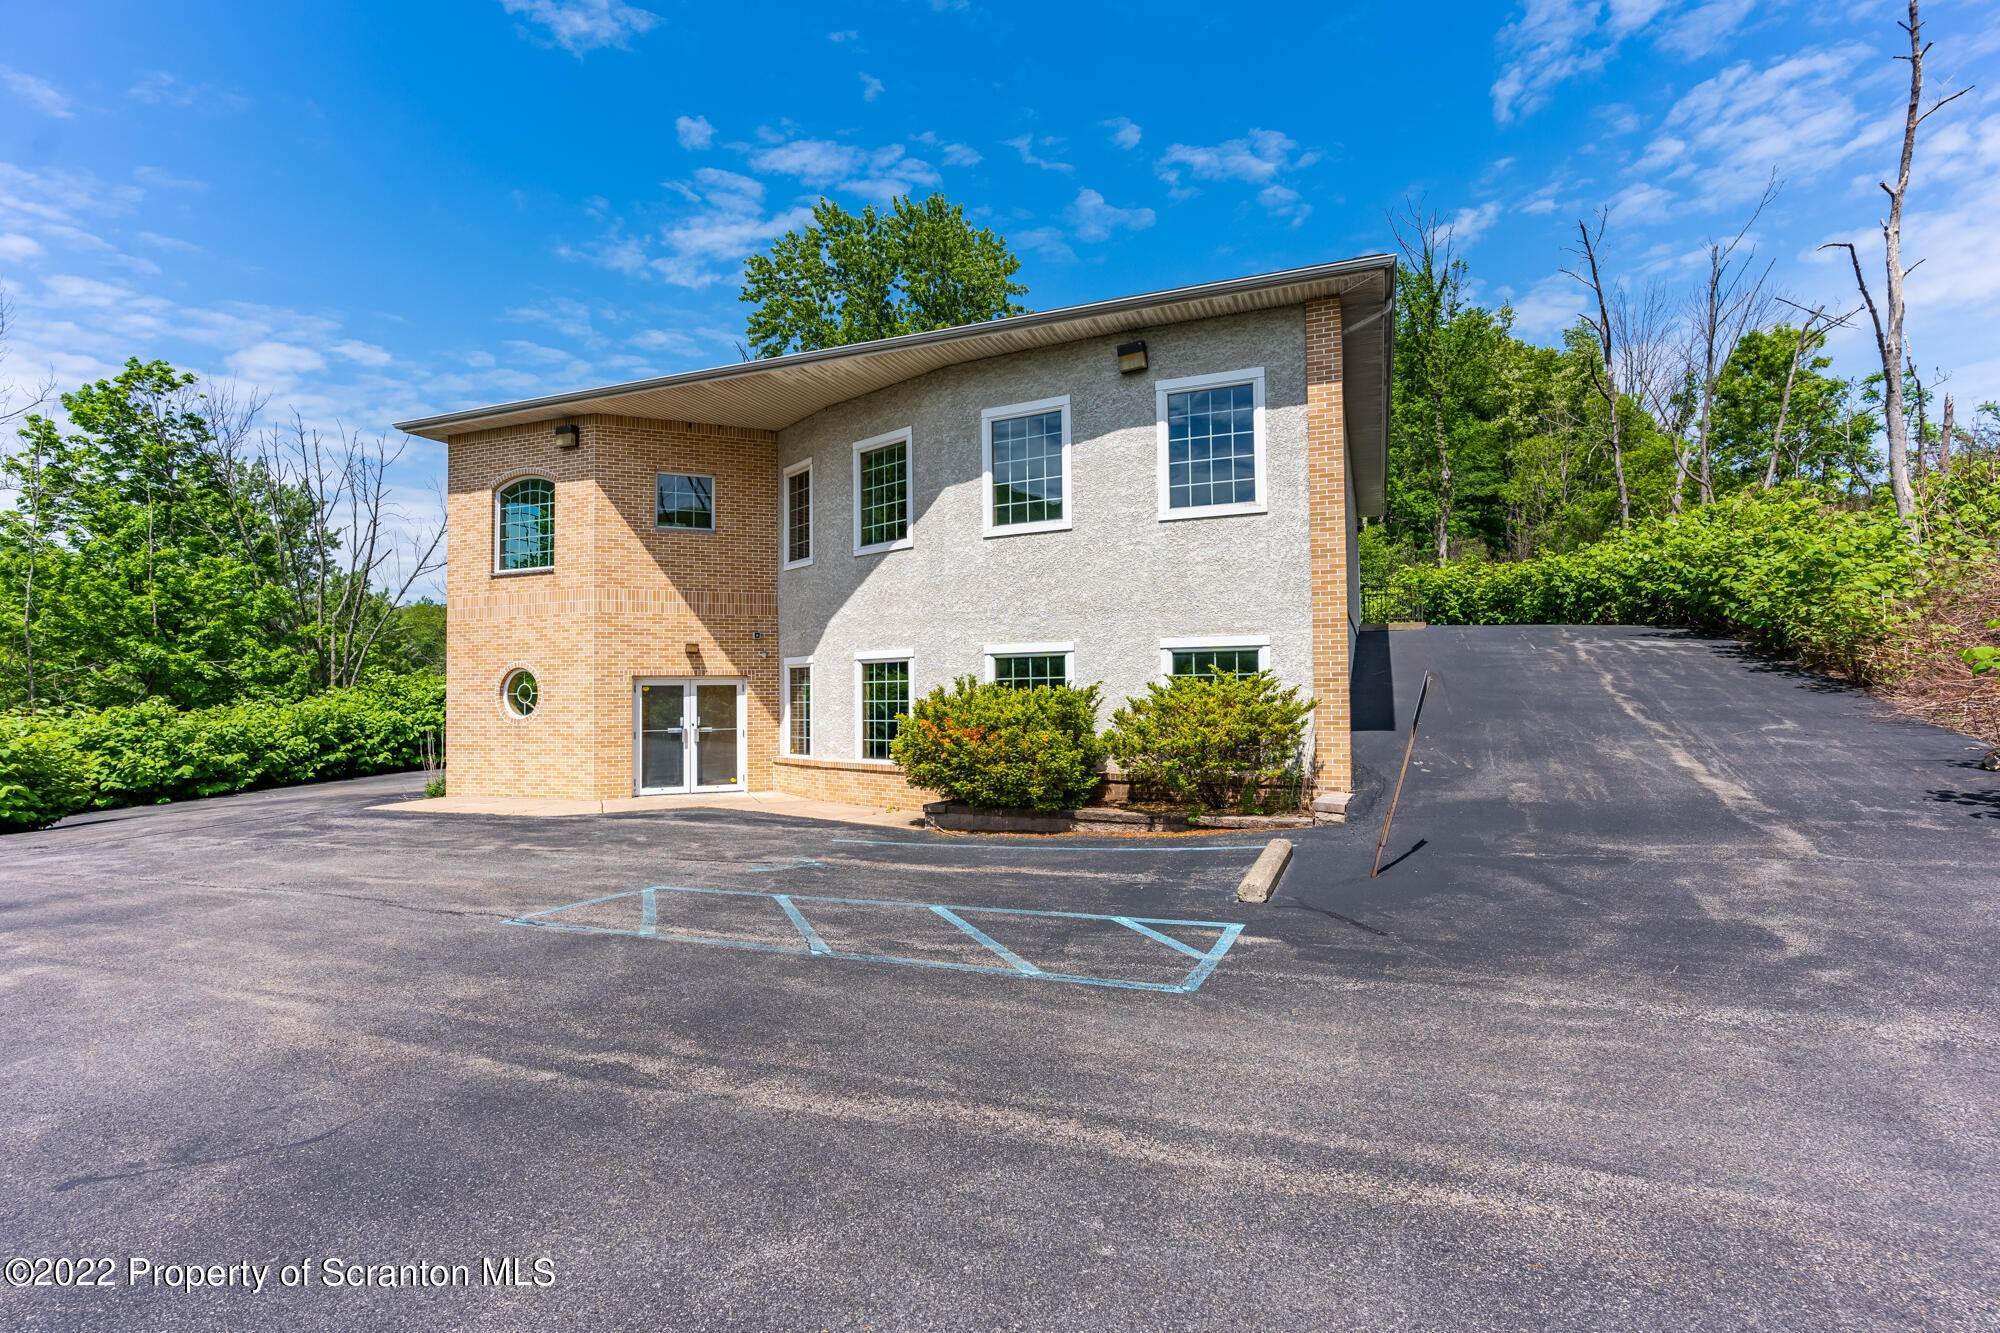 3. Commercial for Rent at 105 Layton Rd Clarks Summit, Pennsylvania 18411 United States